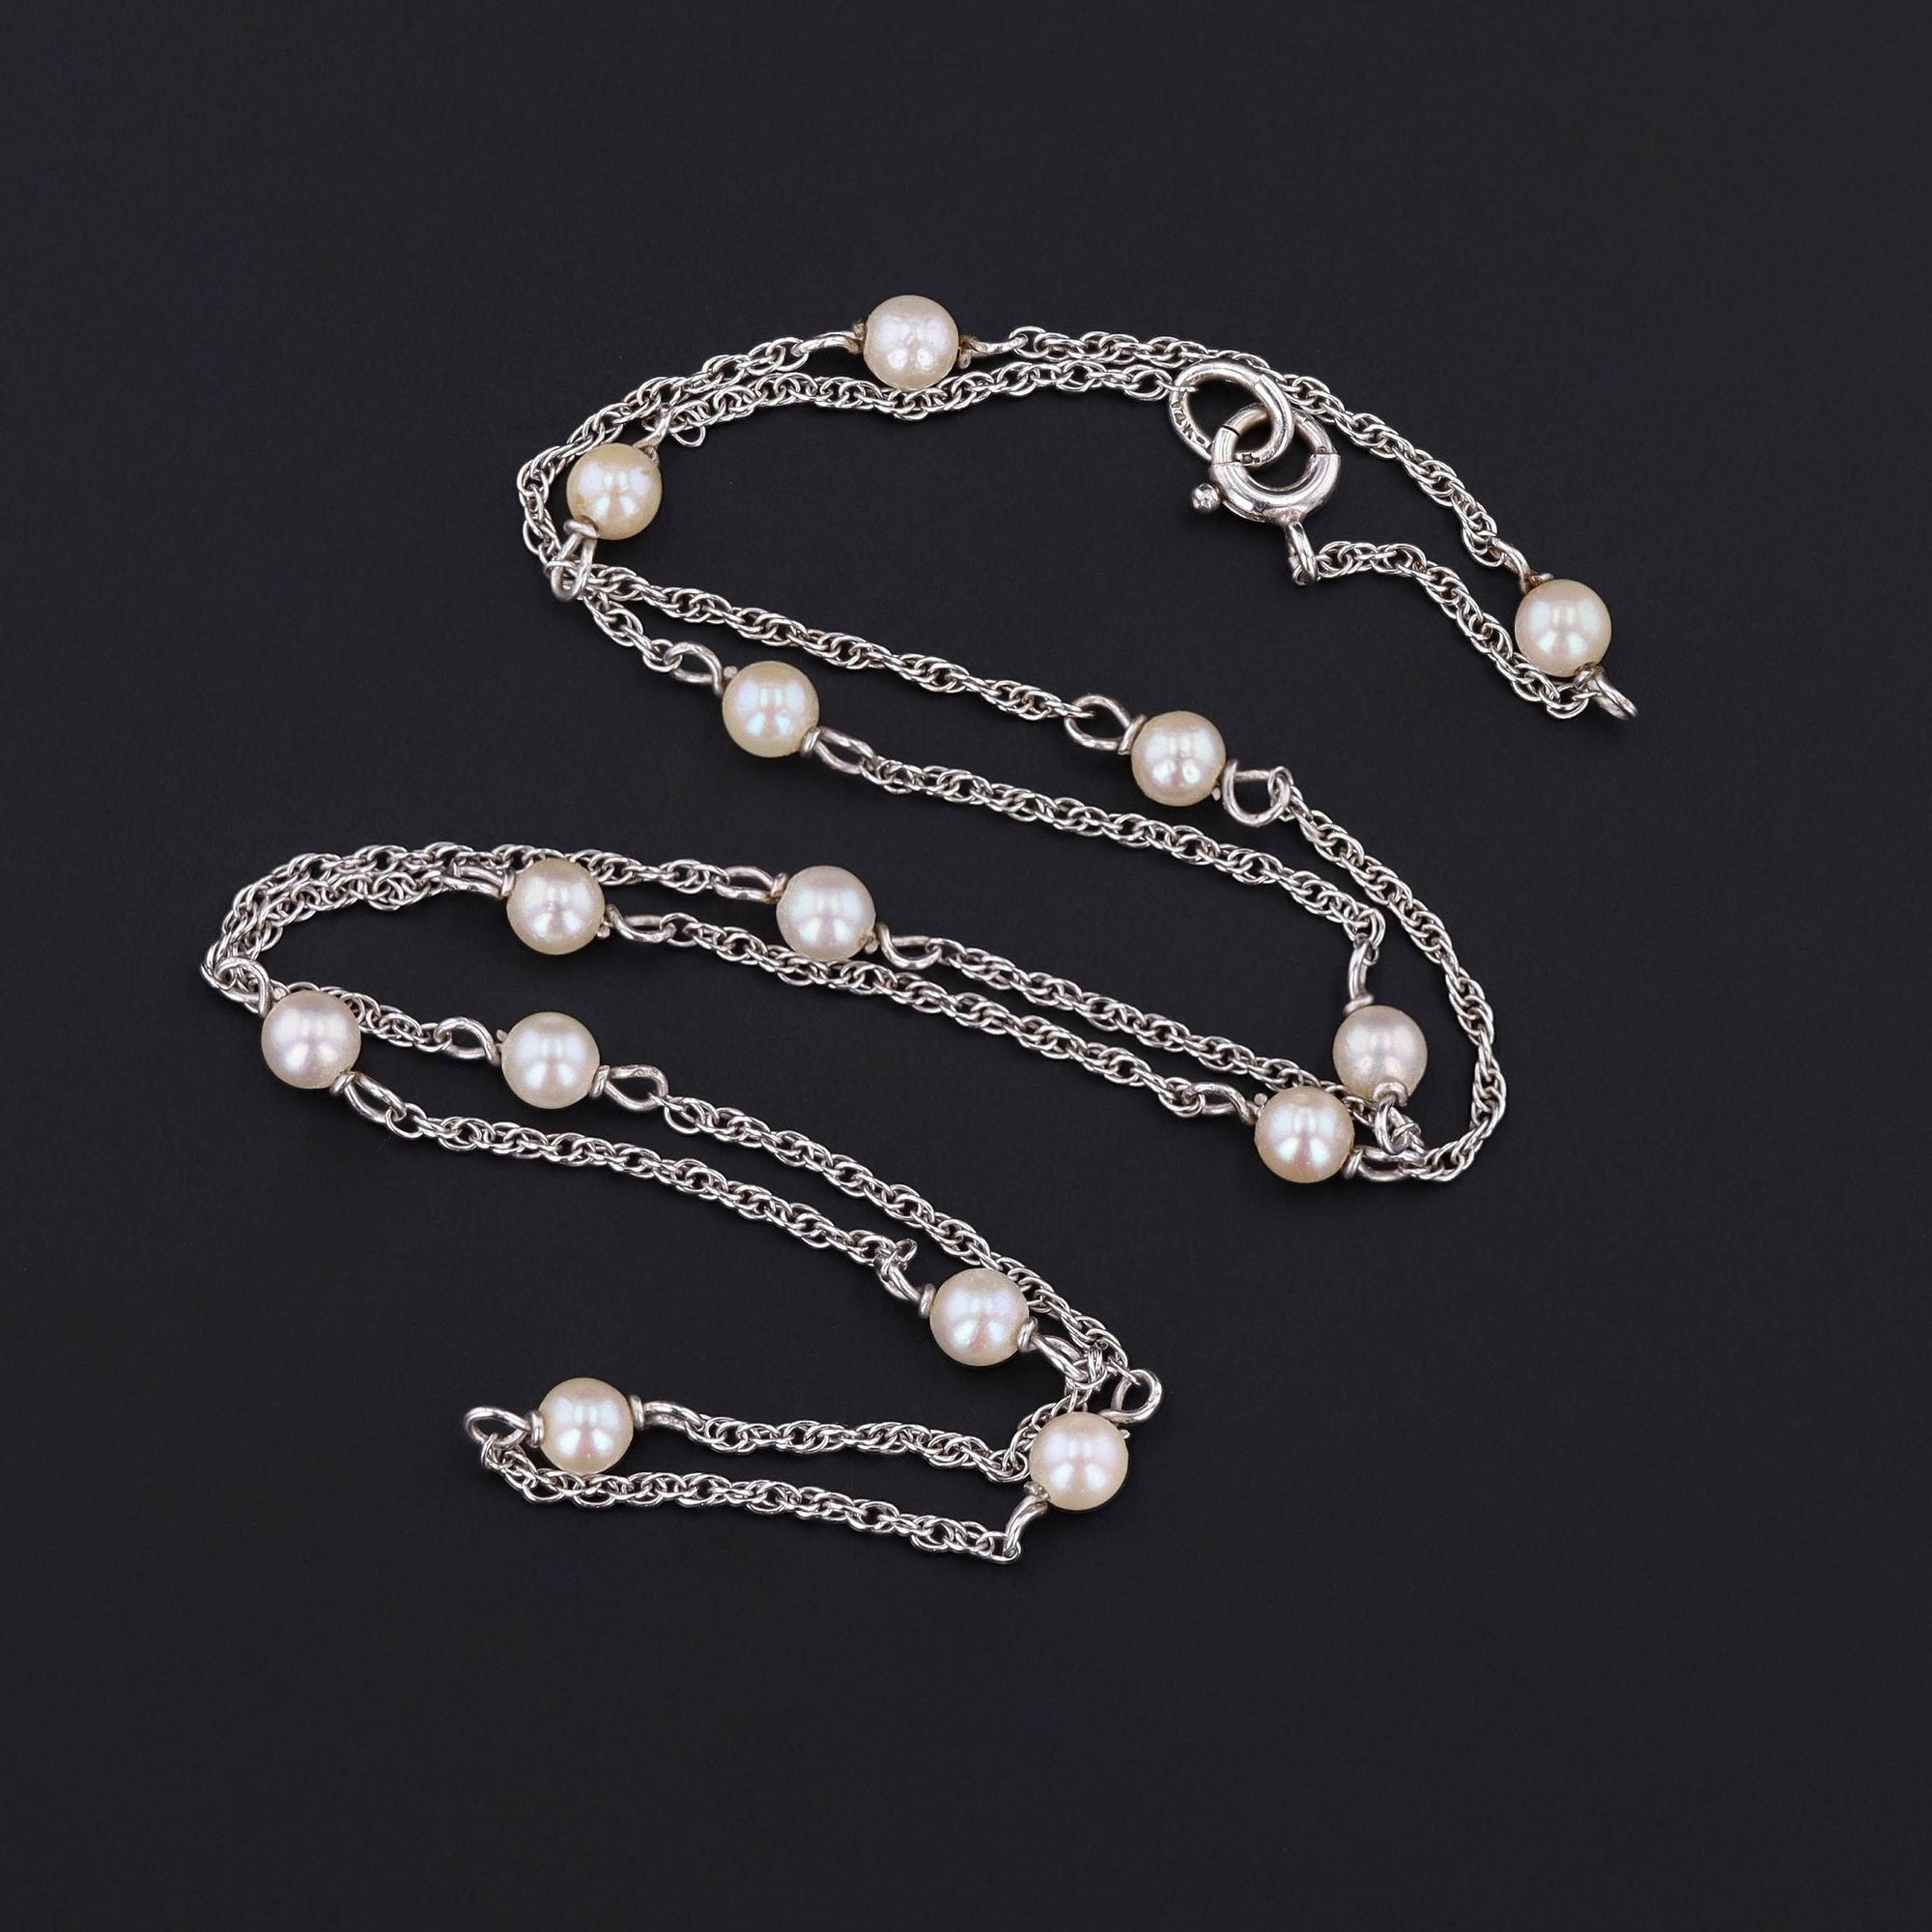 Vintage Pearl Chain Necklace of 14k White Gold